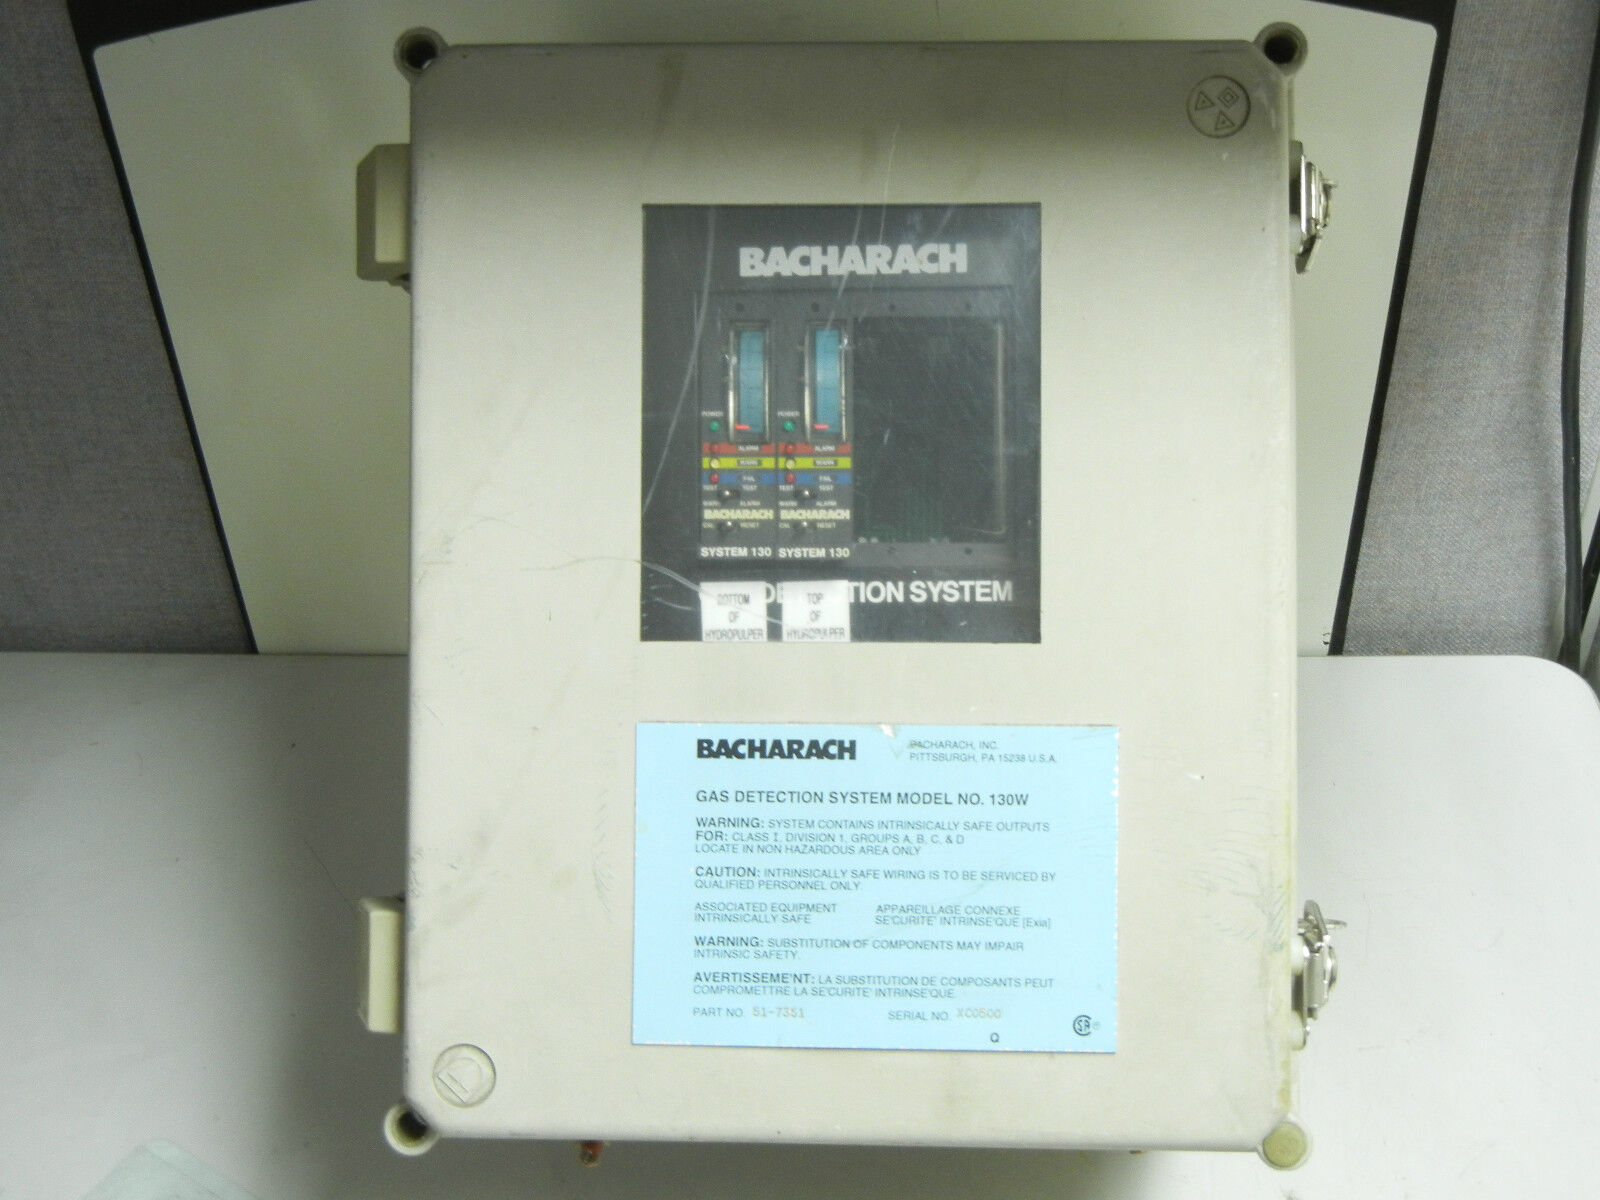 BACHARACH 51-7351 USED GAS DETECTION SYSTEM MODEL NO. 130W 517351